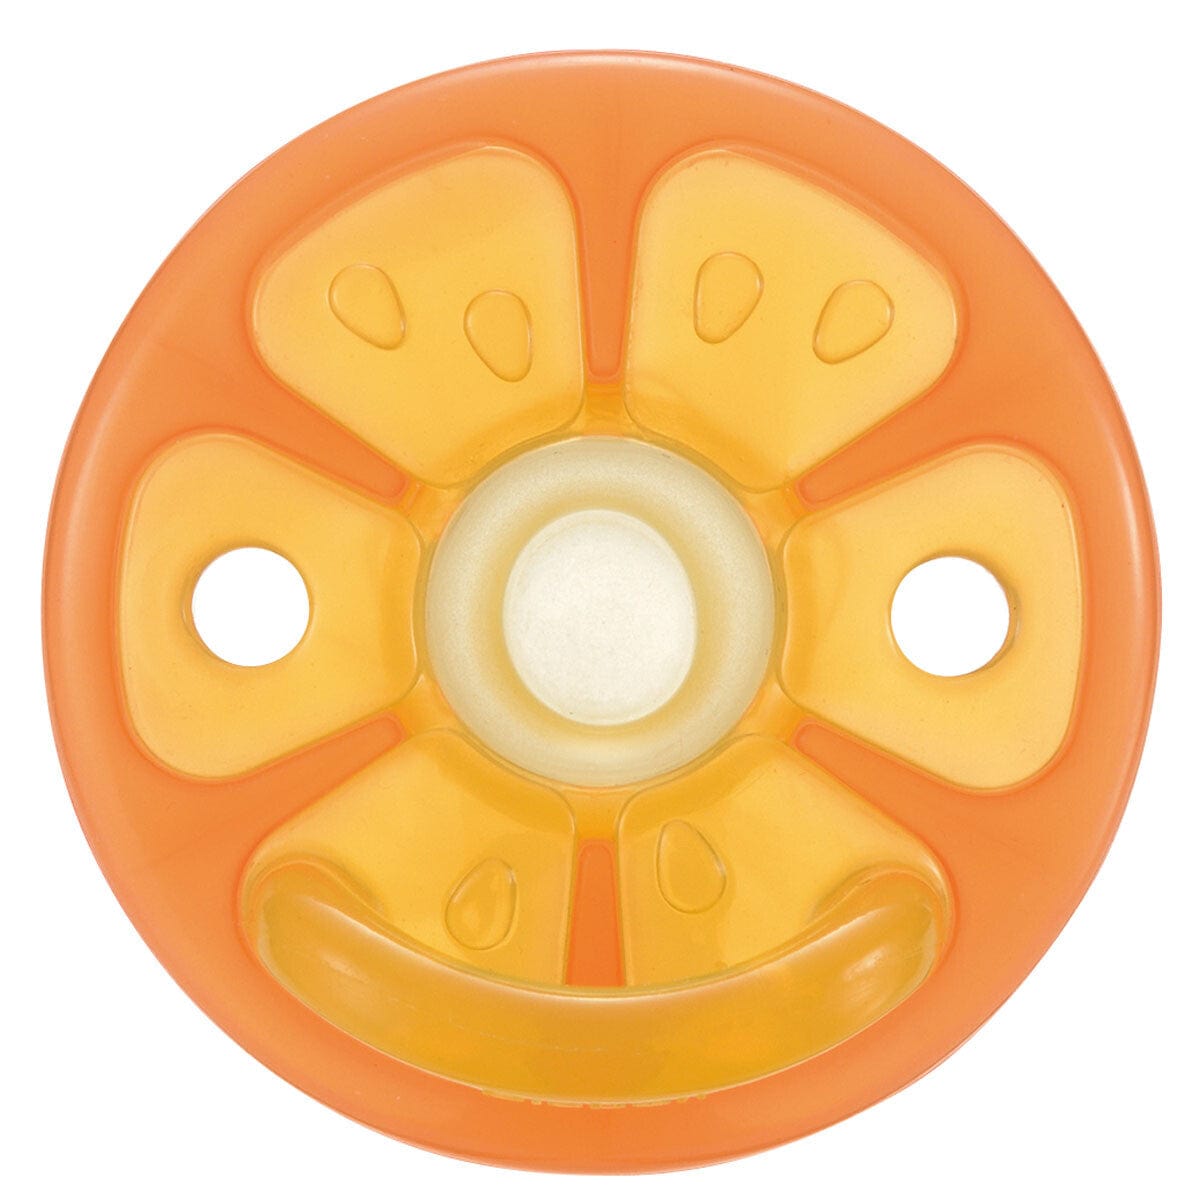 Richell - New Born Baby Silicone Pacifier with Storage Case  Orange 4945680202930 Baby Pacifiers